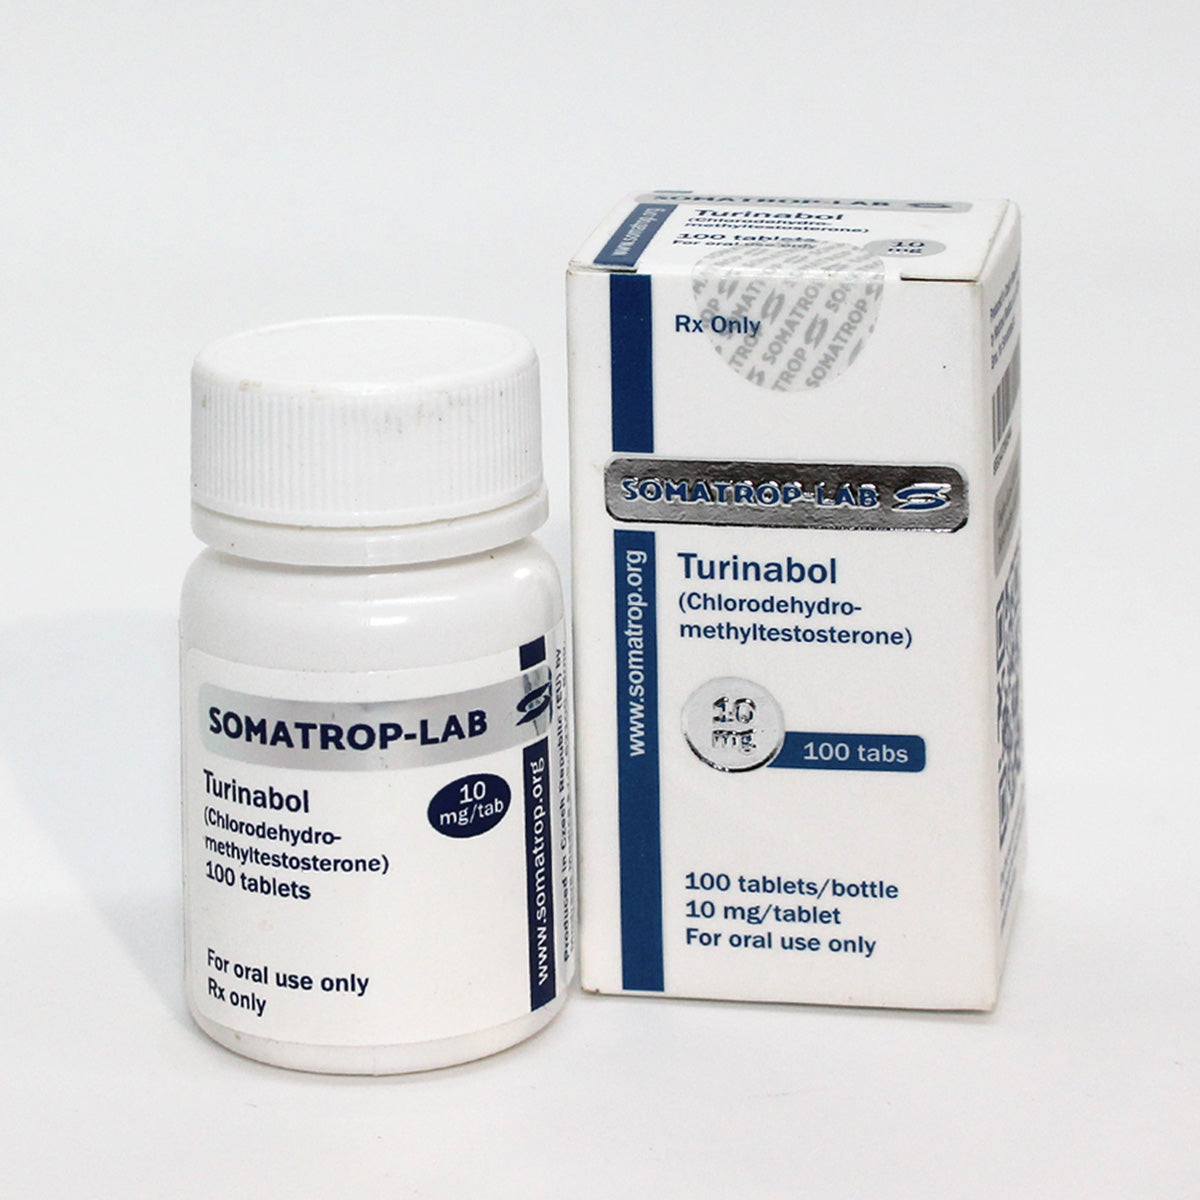 Somatrop-Lab Turinabol: 100 tablets, 10mg each. Front of the packaging.